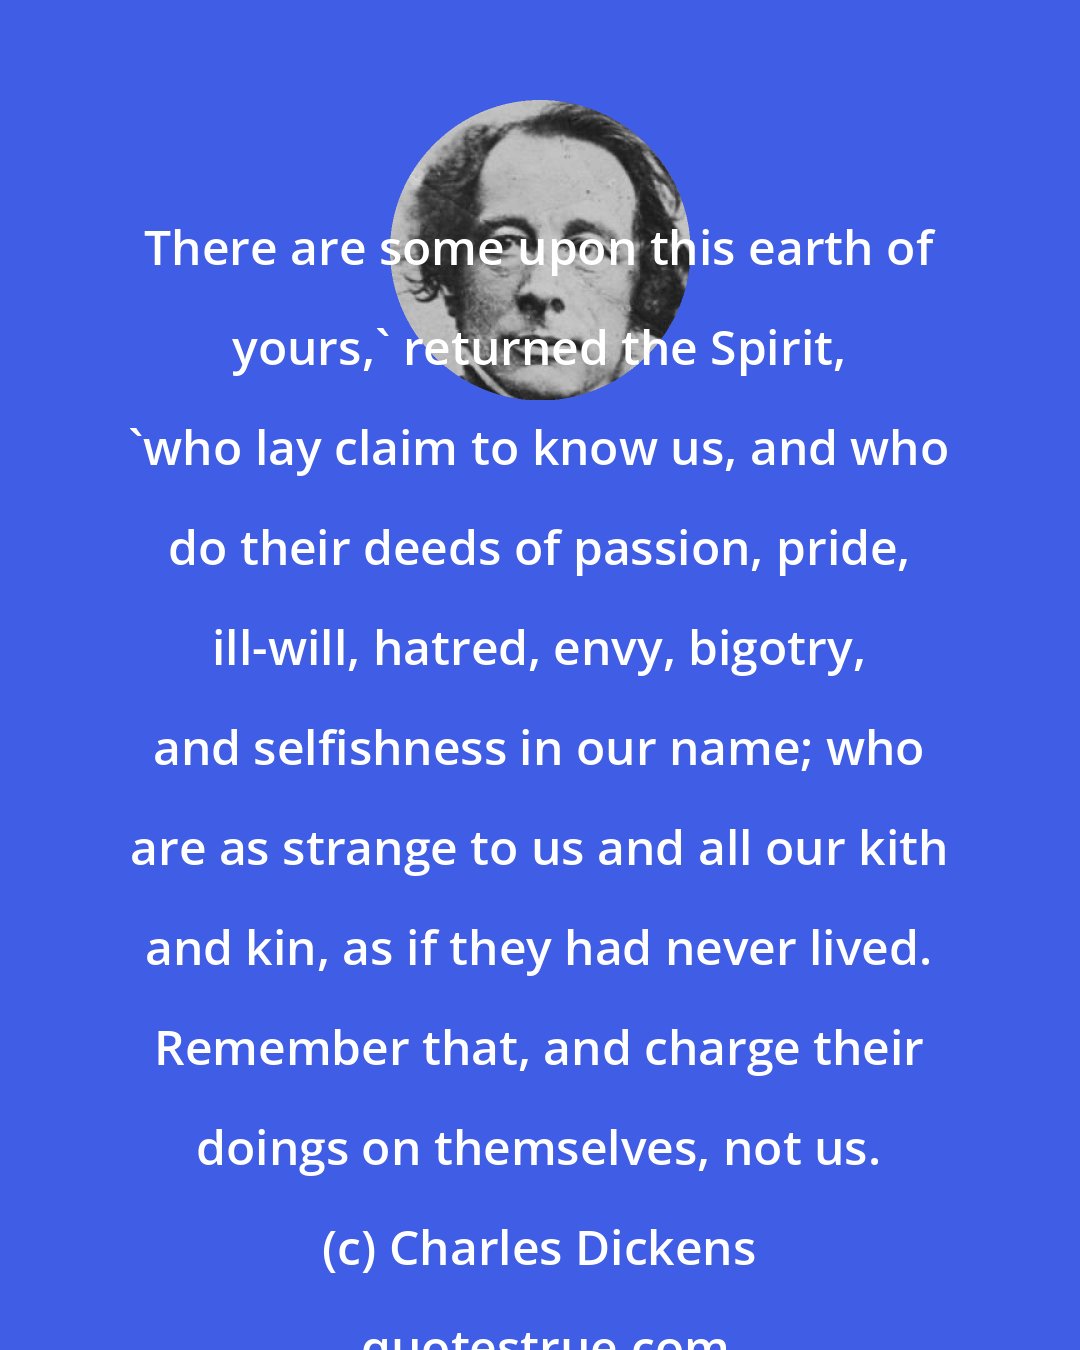 Charles Dickens: There are some upon this earth of yours,' returned the Spirit, 'who lay claim to know us, and who do their deeds of passion, pride, ill-will, hatred, envy, bigotry, and selfishness in our name; who are as strange to us and all our kith and kin, as if they had never lived. Remember that, and charge their doings on themselves, not us.